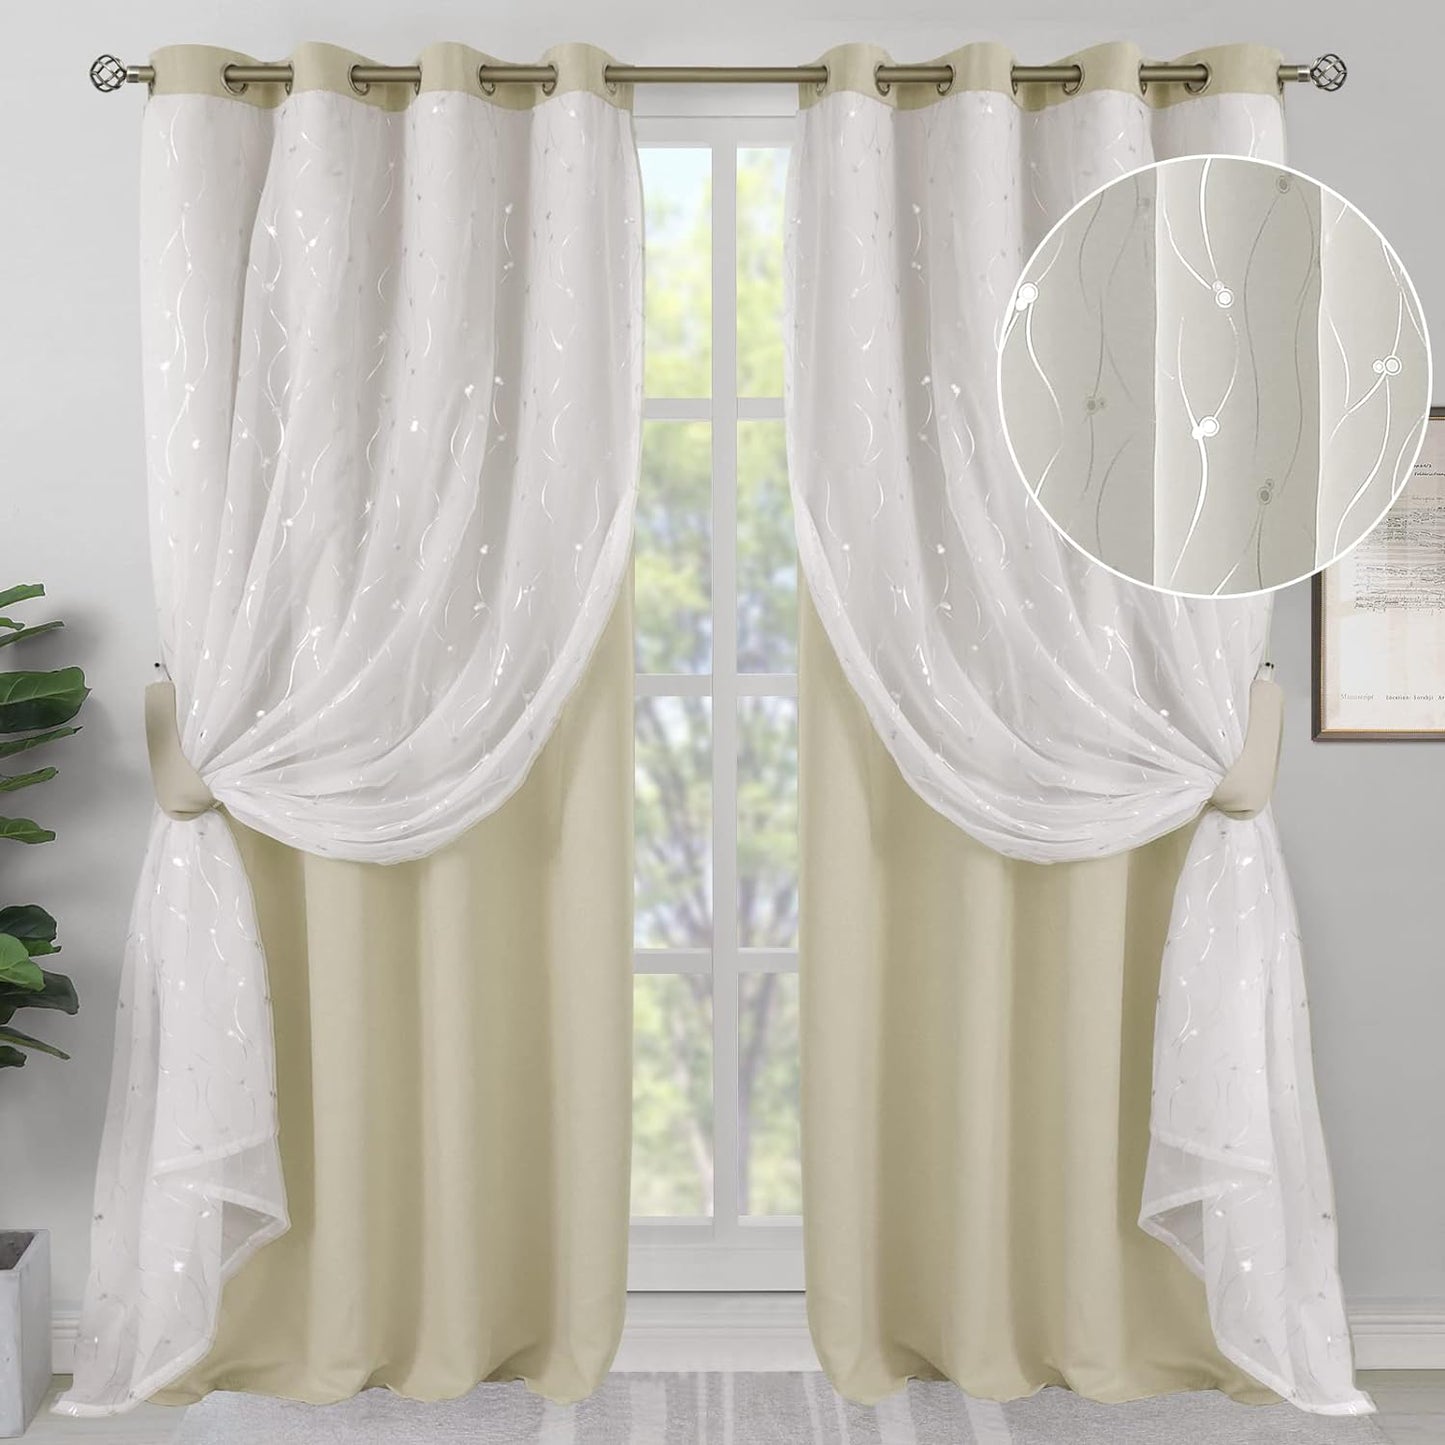 Bgment Grey Blackout Curtains with Sheer Overlay 84 Inches Long，Double Layer Silver Printed Kids Curtains Grommet Thermal Insulated Window Drapes for Living Room, 2 Panel, 52 X 84, Dark Grey  BGment Beige 52W X 95L 